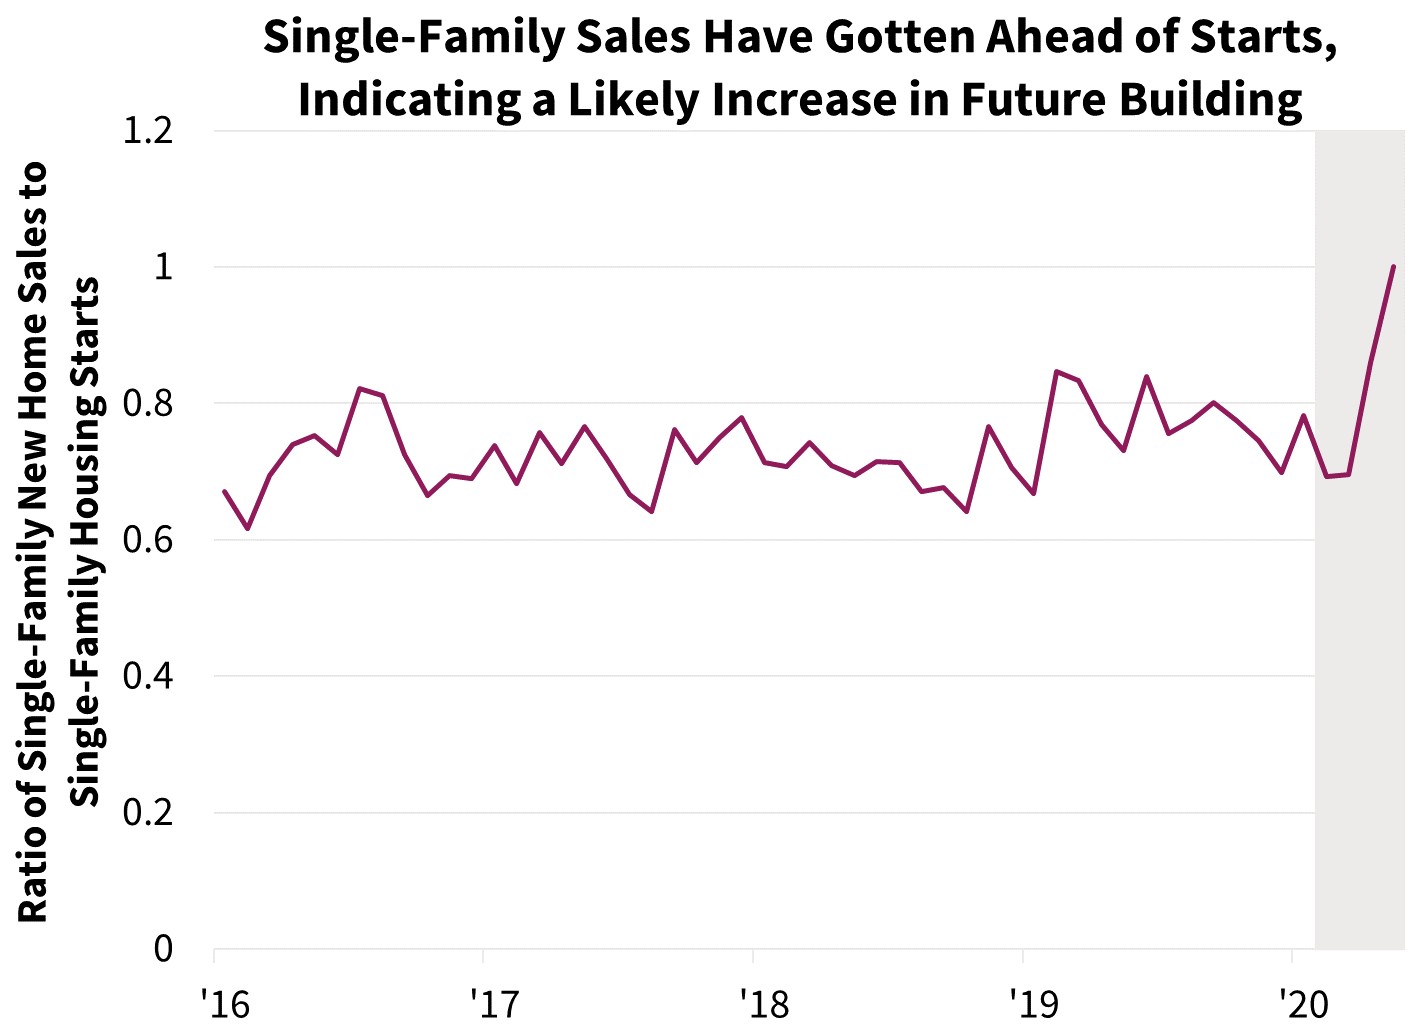 Single-Family Sales have Gotten Ahead of Starts, Indicating a Likely Increase in Future Building